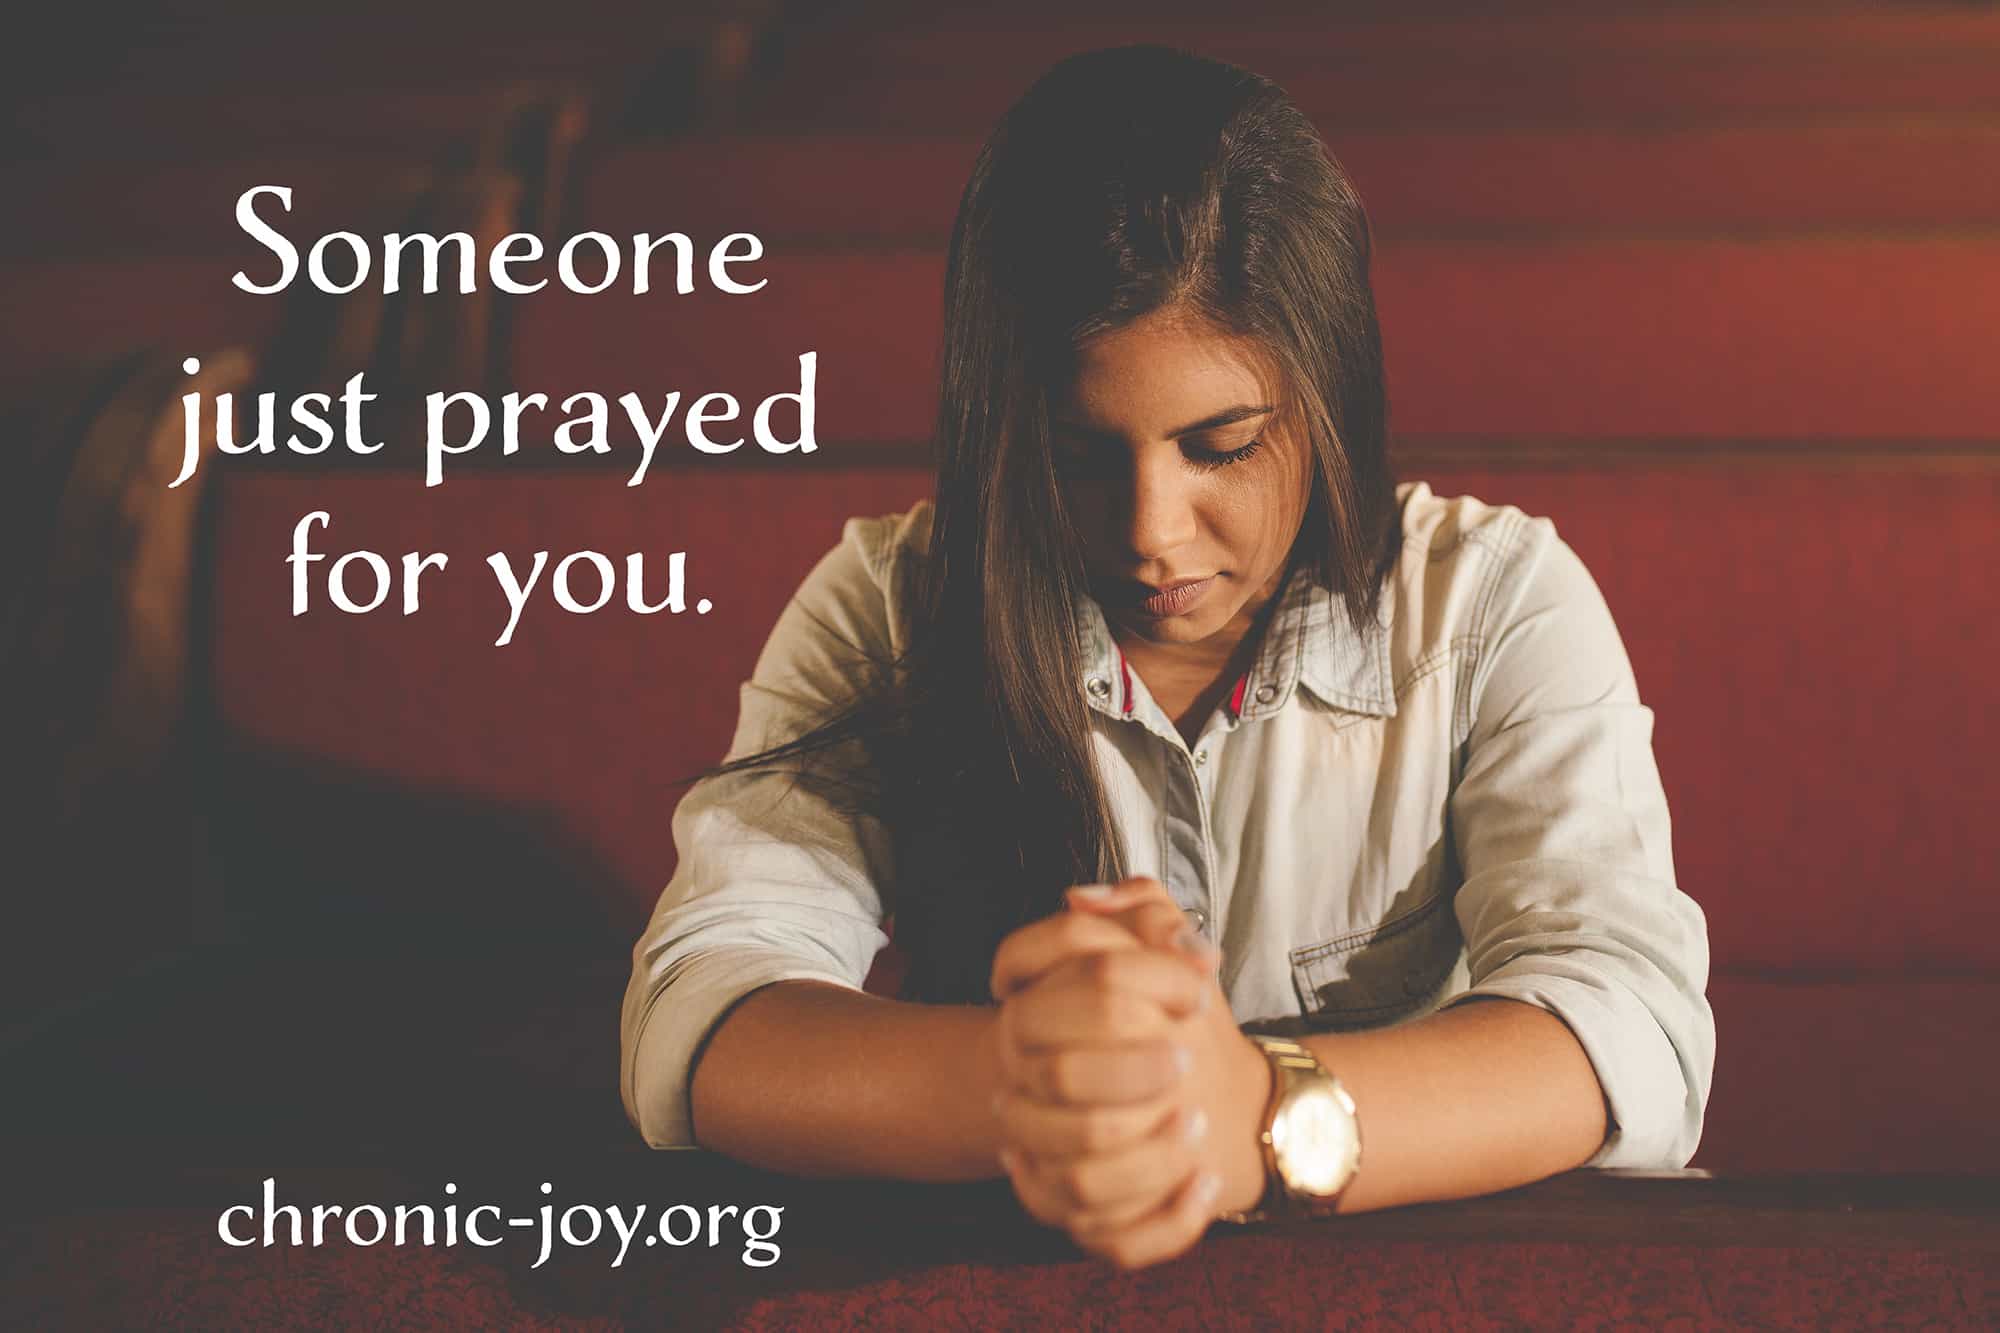 Someone just prayed for you.